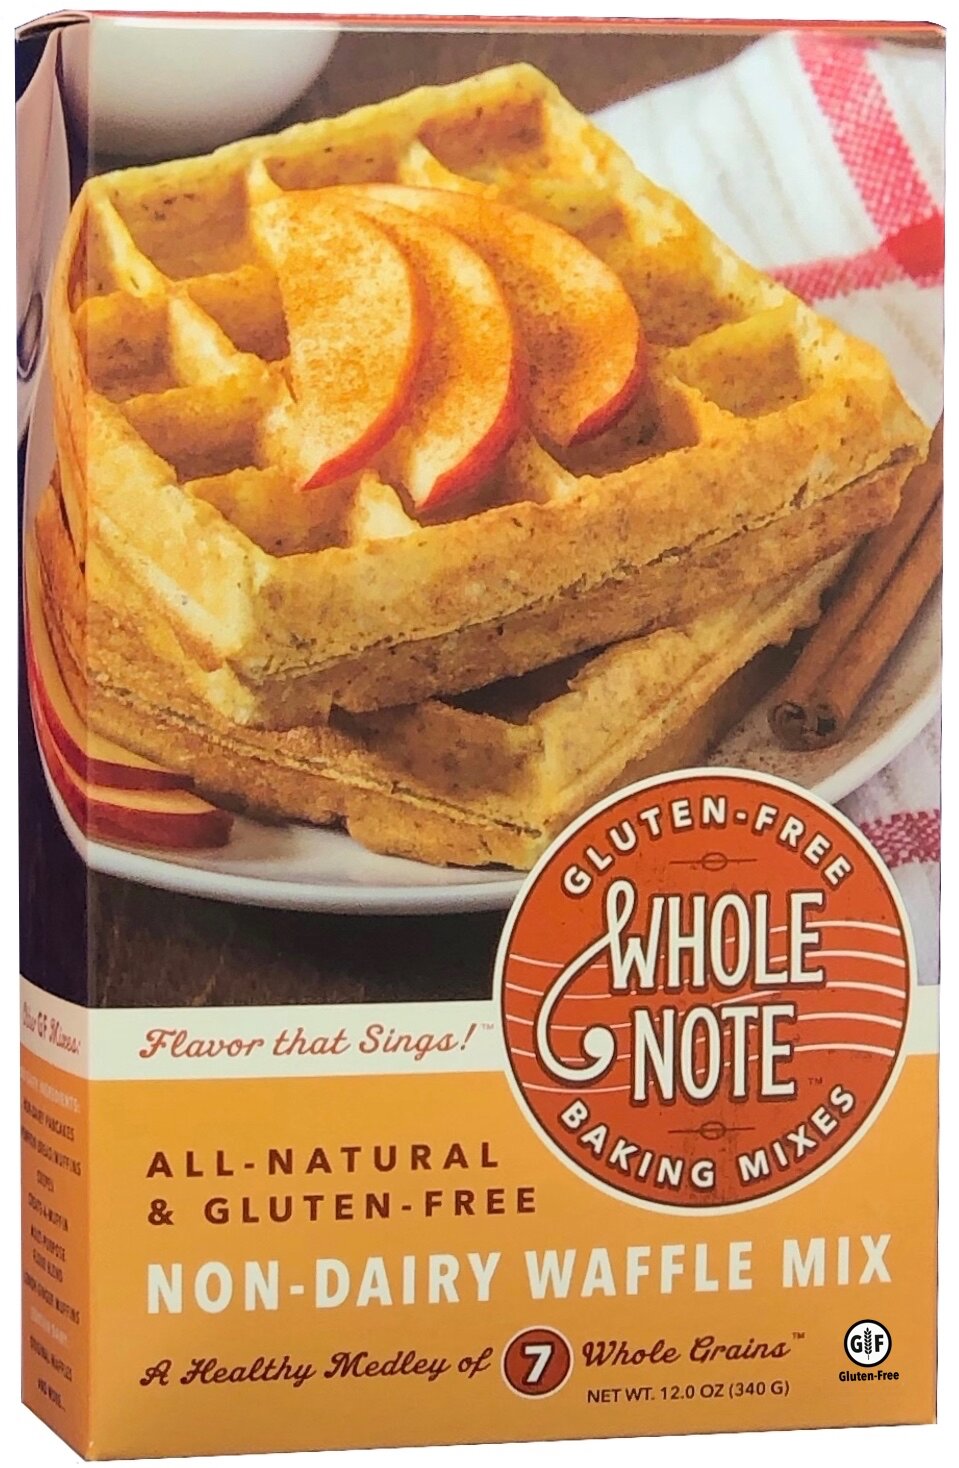 Non-Dairy Waffle Mix